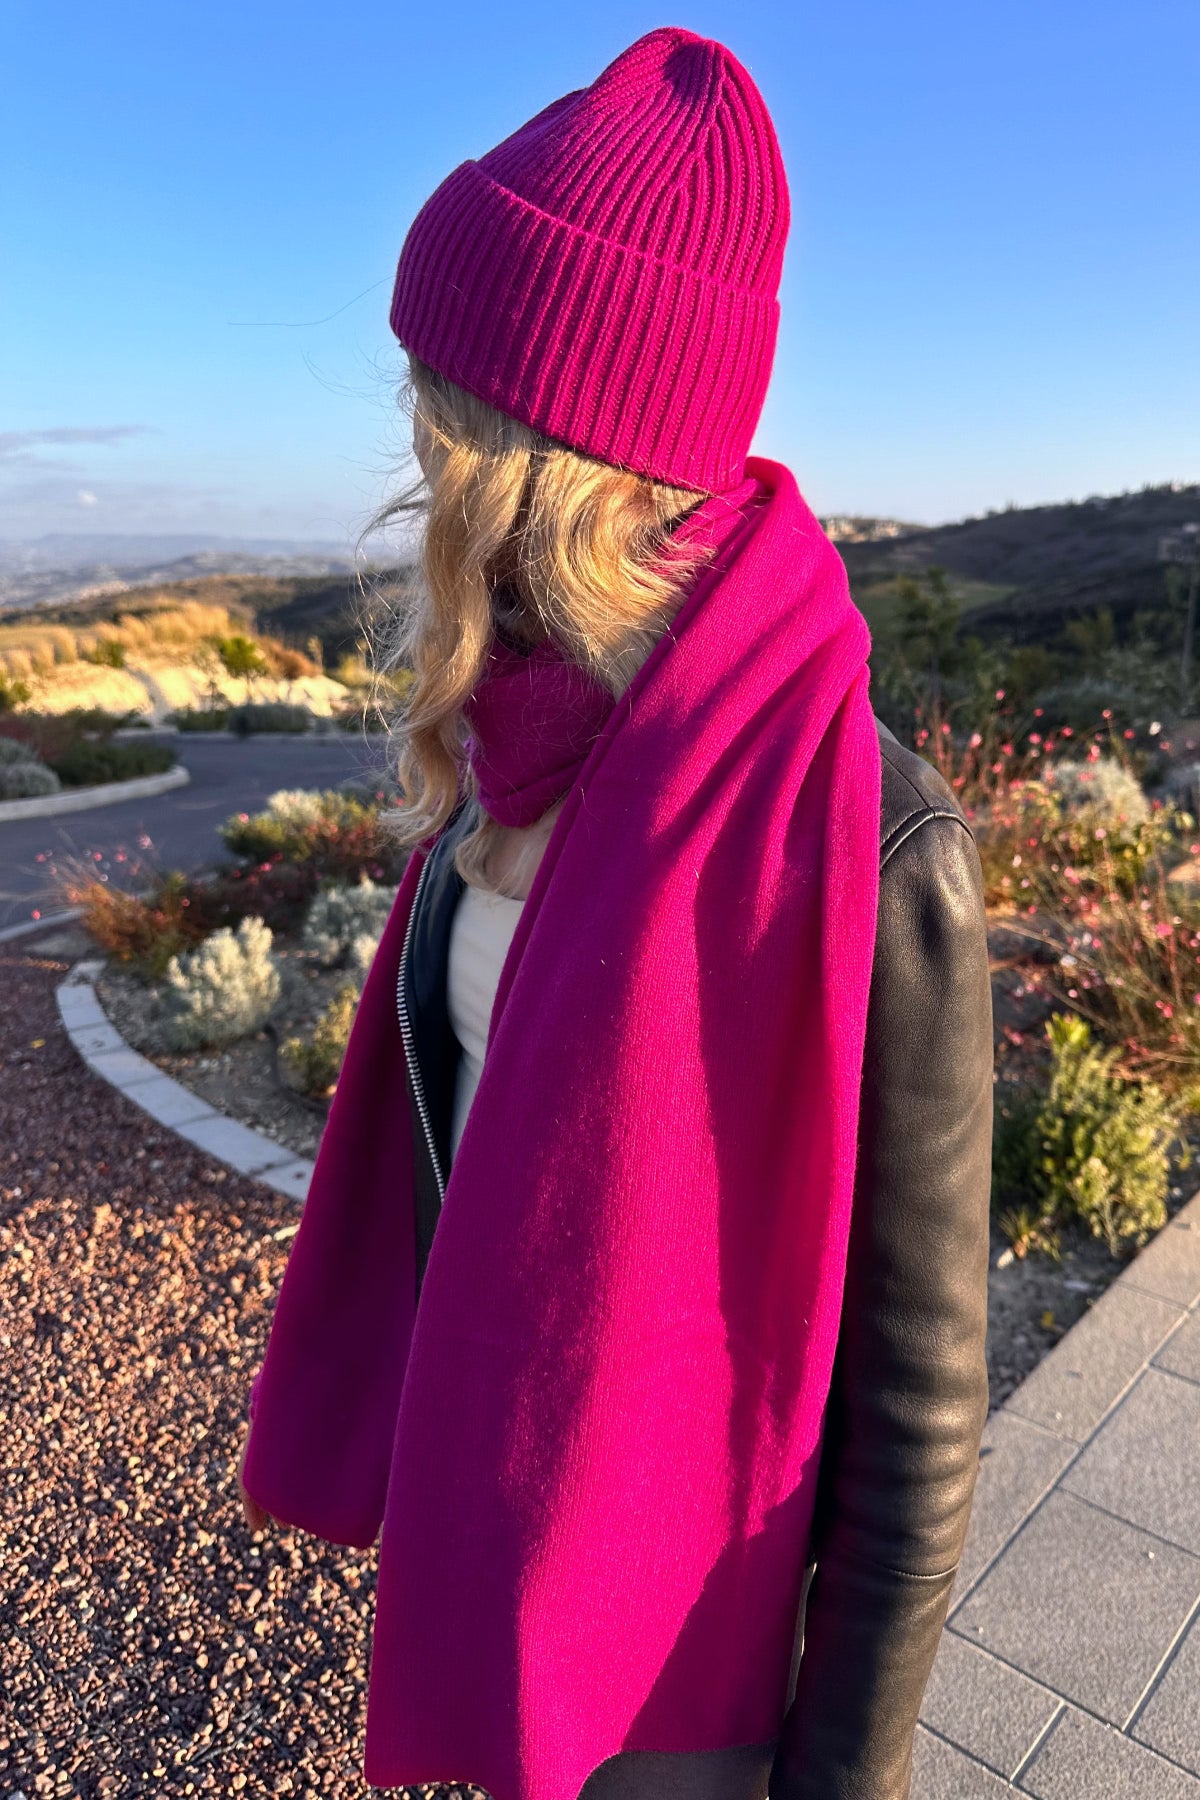 Offer: Scarf and Hat Set made of 100% pure Cashmere